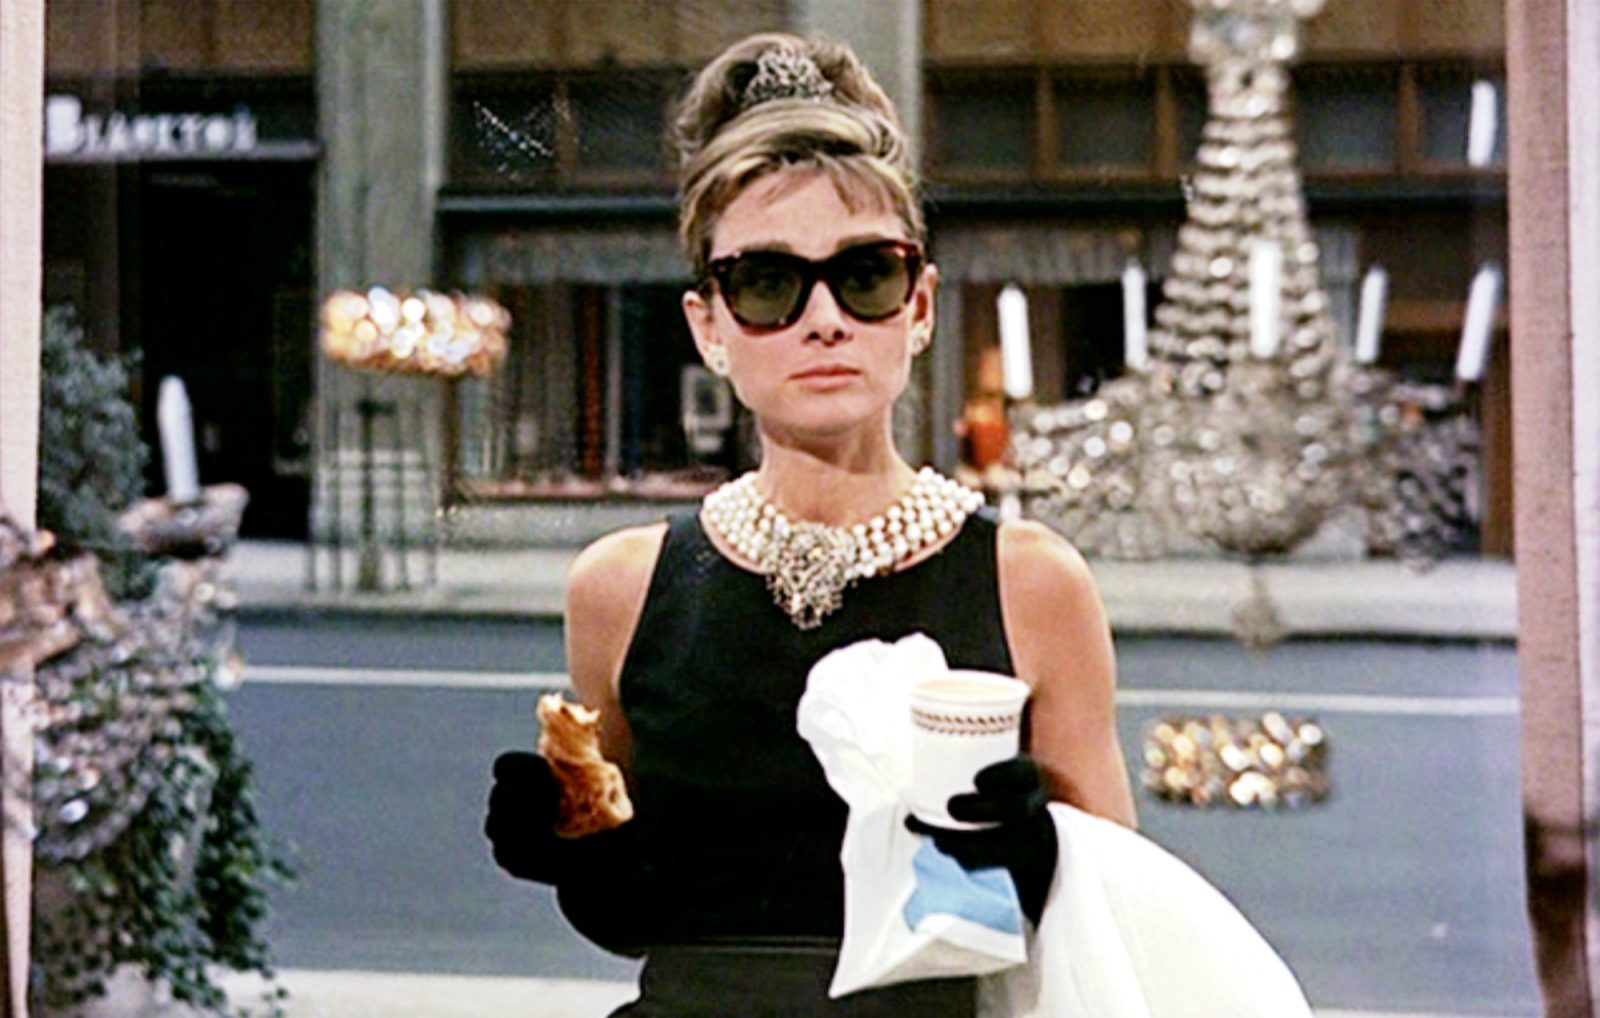 If You Know Your Movies, You Would Have No Problem Acing This Quiz Breakfast at Tiffany's